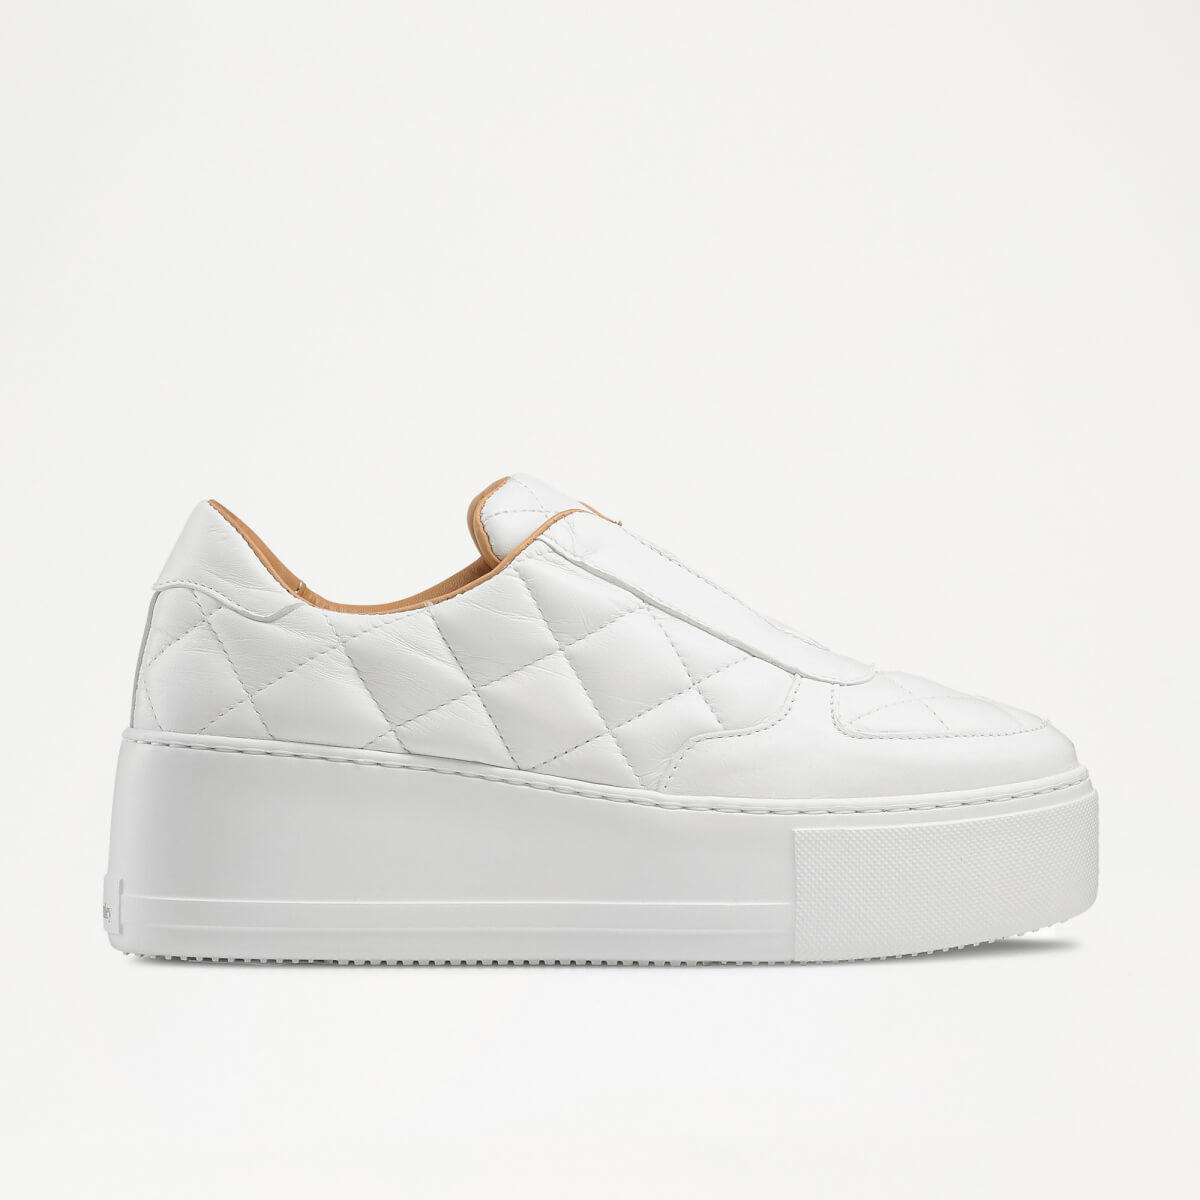 Russell & Bromley Women's White Calf Leather Quilted PUFFY Laceless Sneakers, Size: UK 5